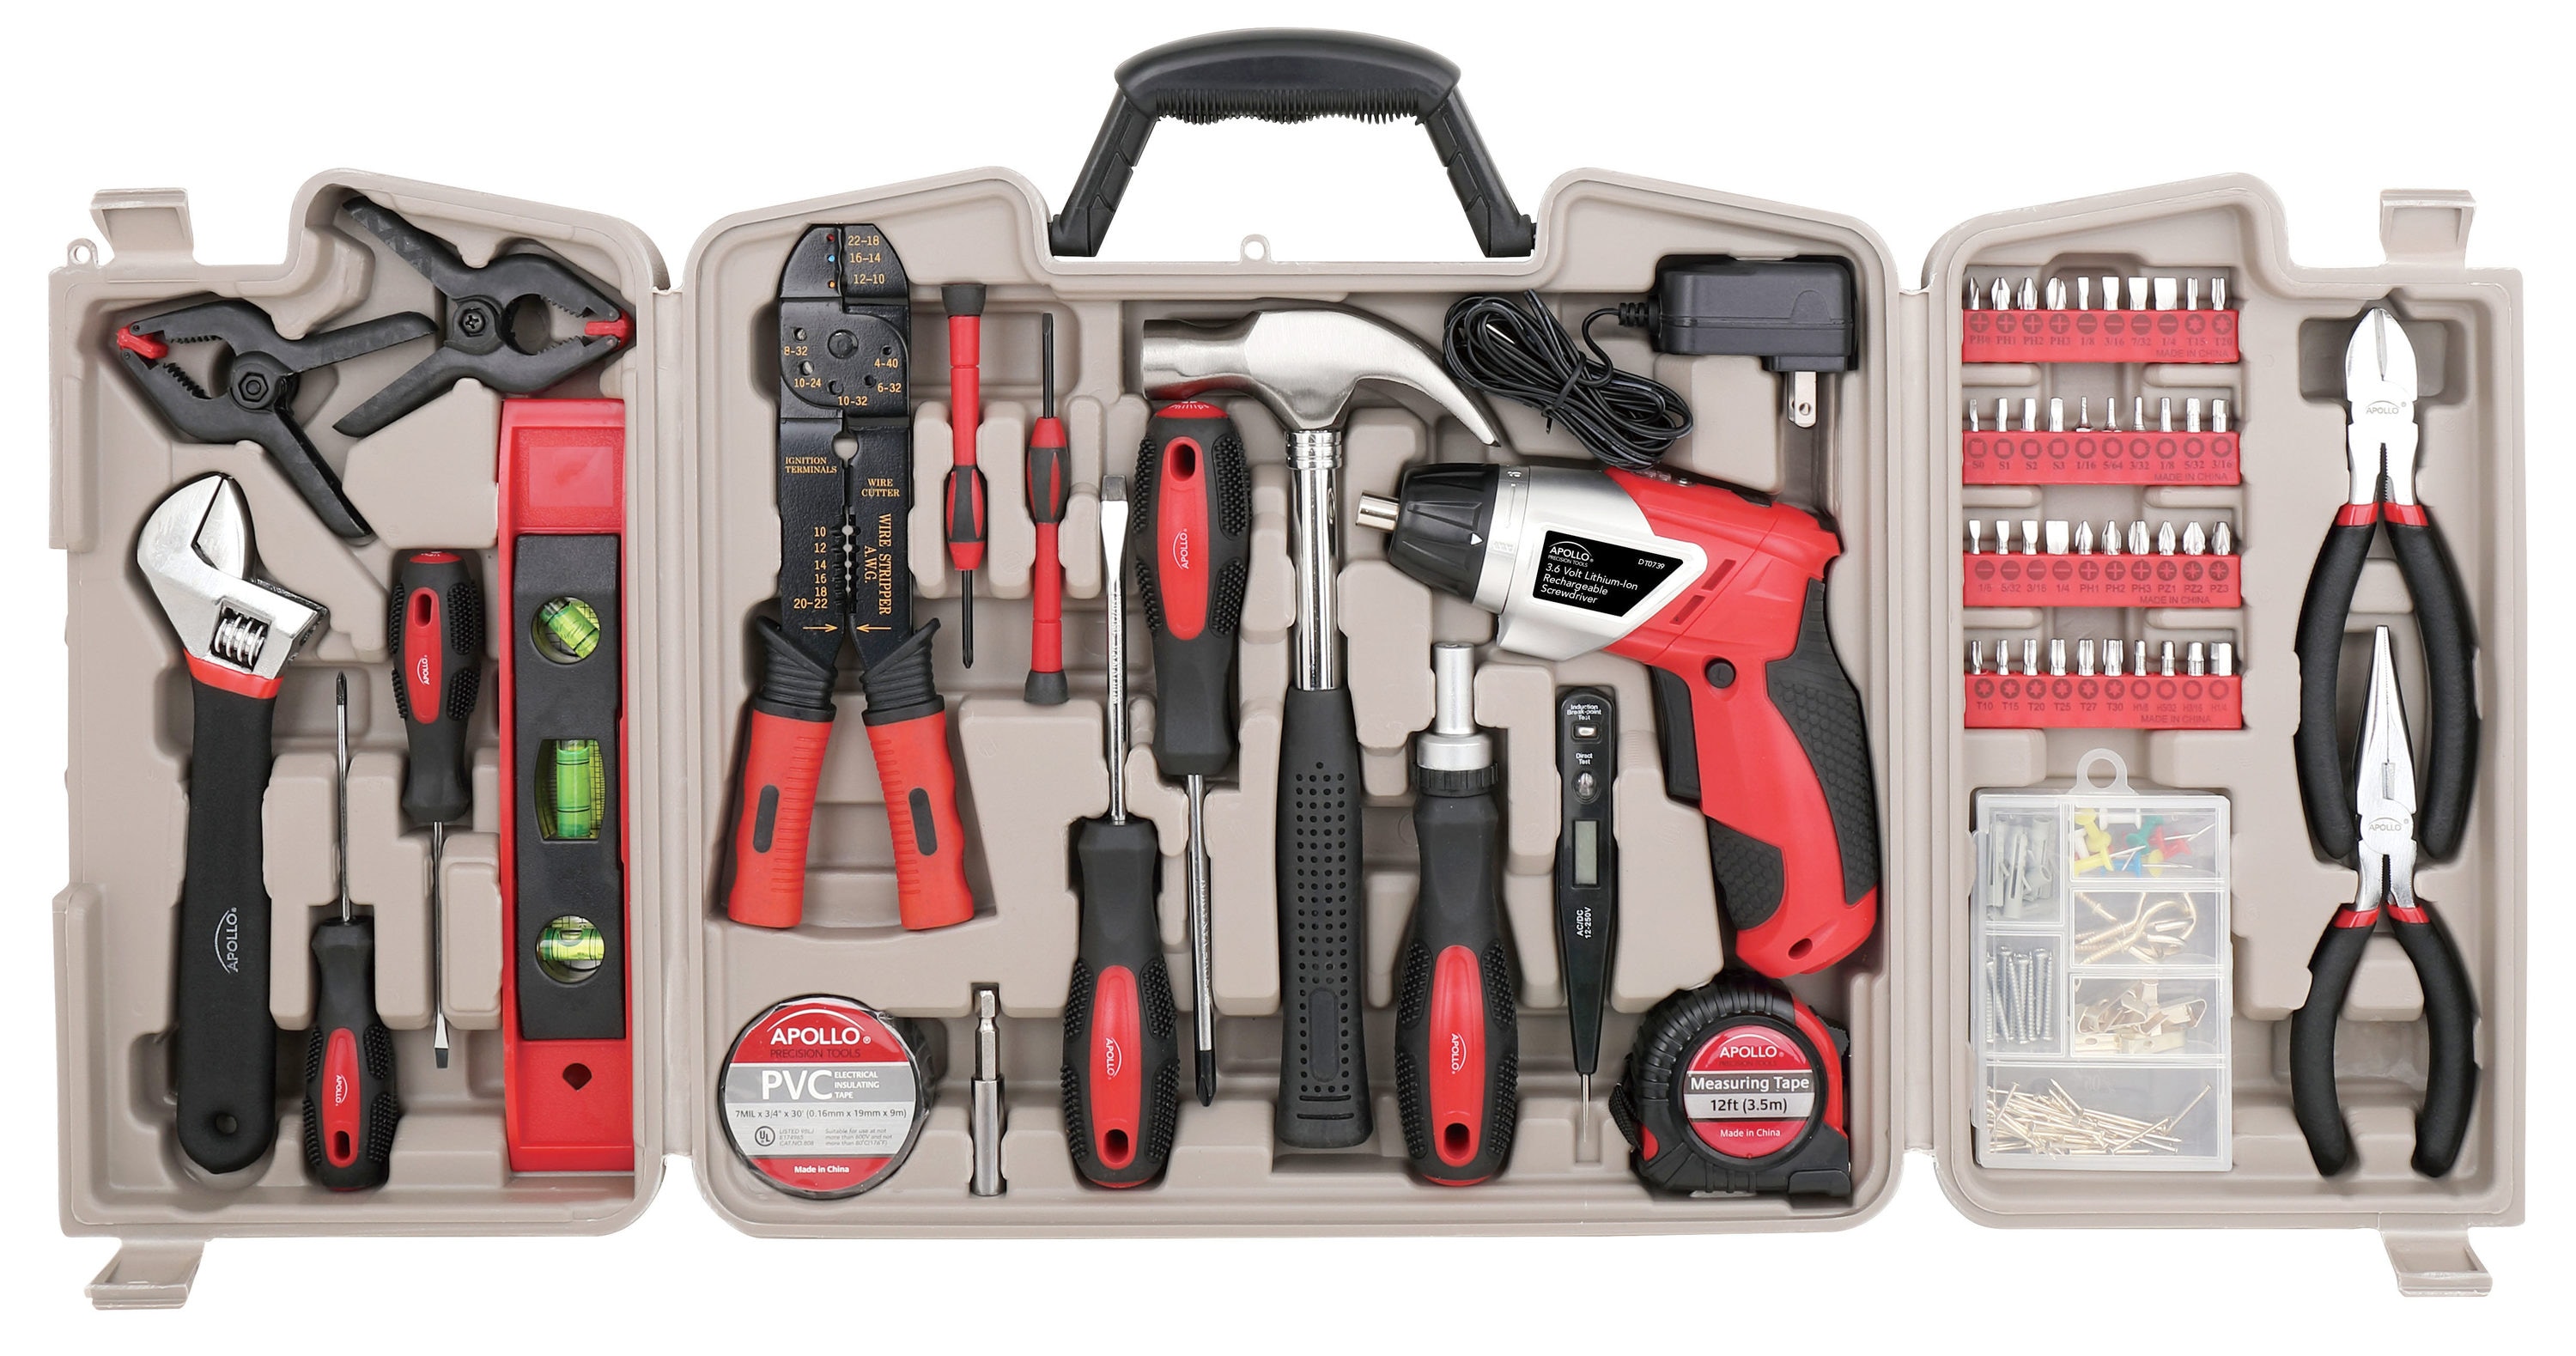 DURAMOVE Household Tool Kit for Homeowner, 58 Piece Home/Auto Repair Hand Tool Set with Tool Box, Mixed Tool Set for man,women,father,handyman